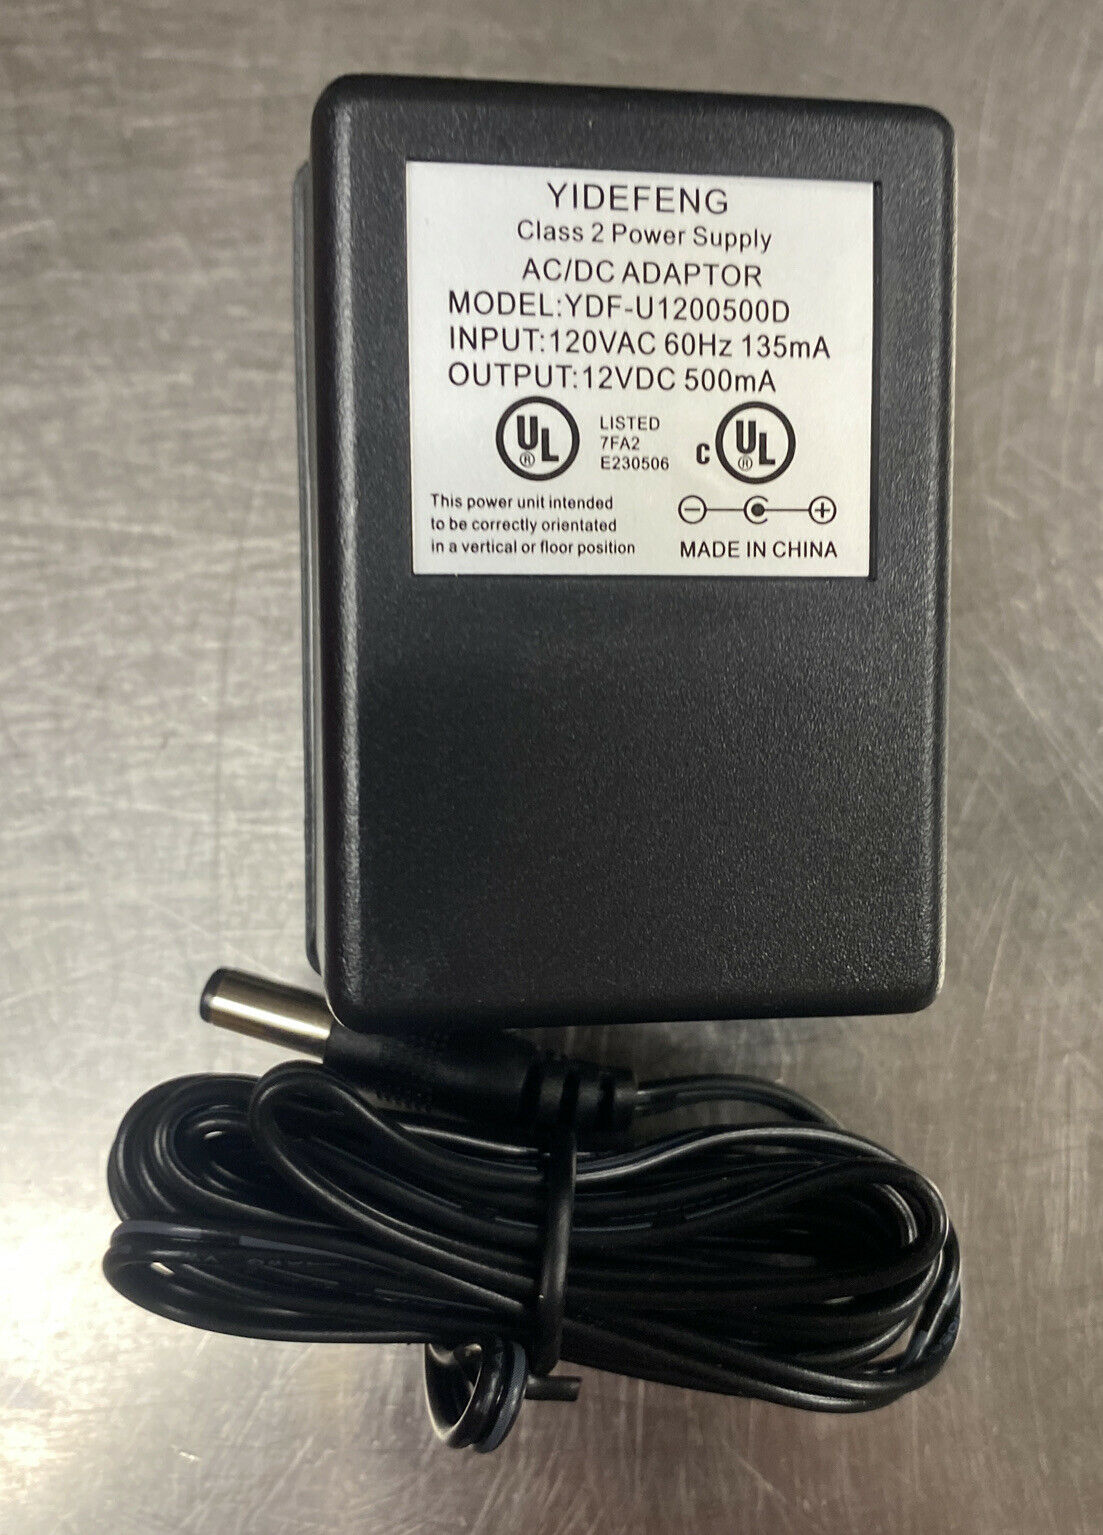 12V 500mA AC DC Adapter Wall Mount Linear Power Supplies Adapter - Yidefeng Brand: Yidefeng Type: